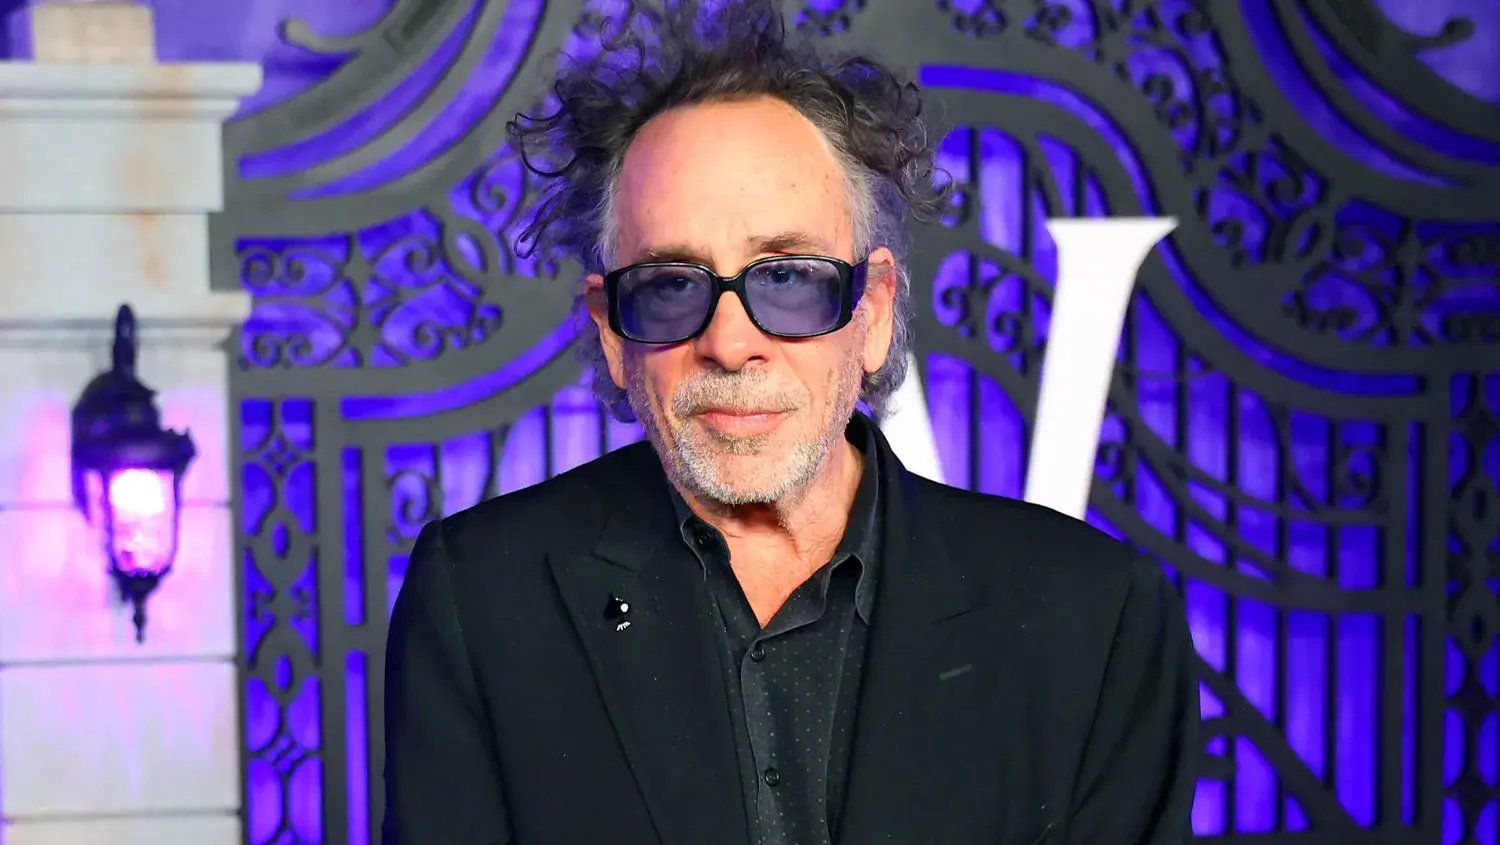 Famous People With Autism Spectrum Disorder - Tim Burton - Movie Director